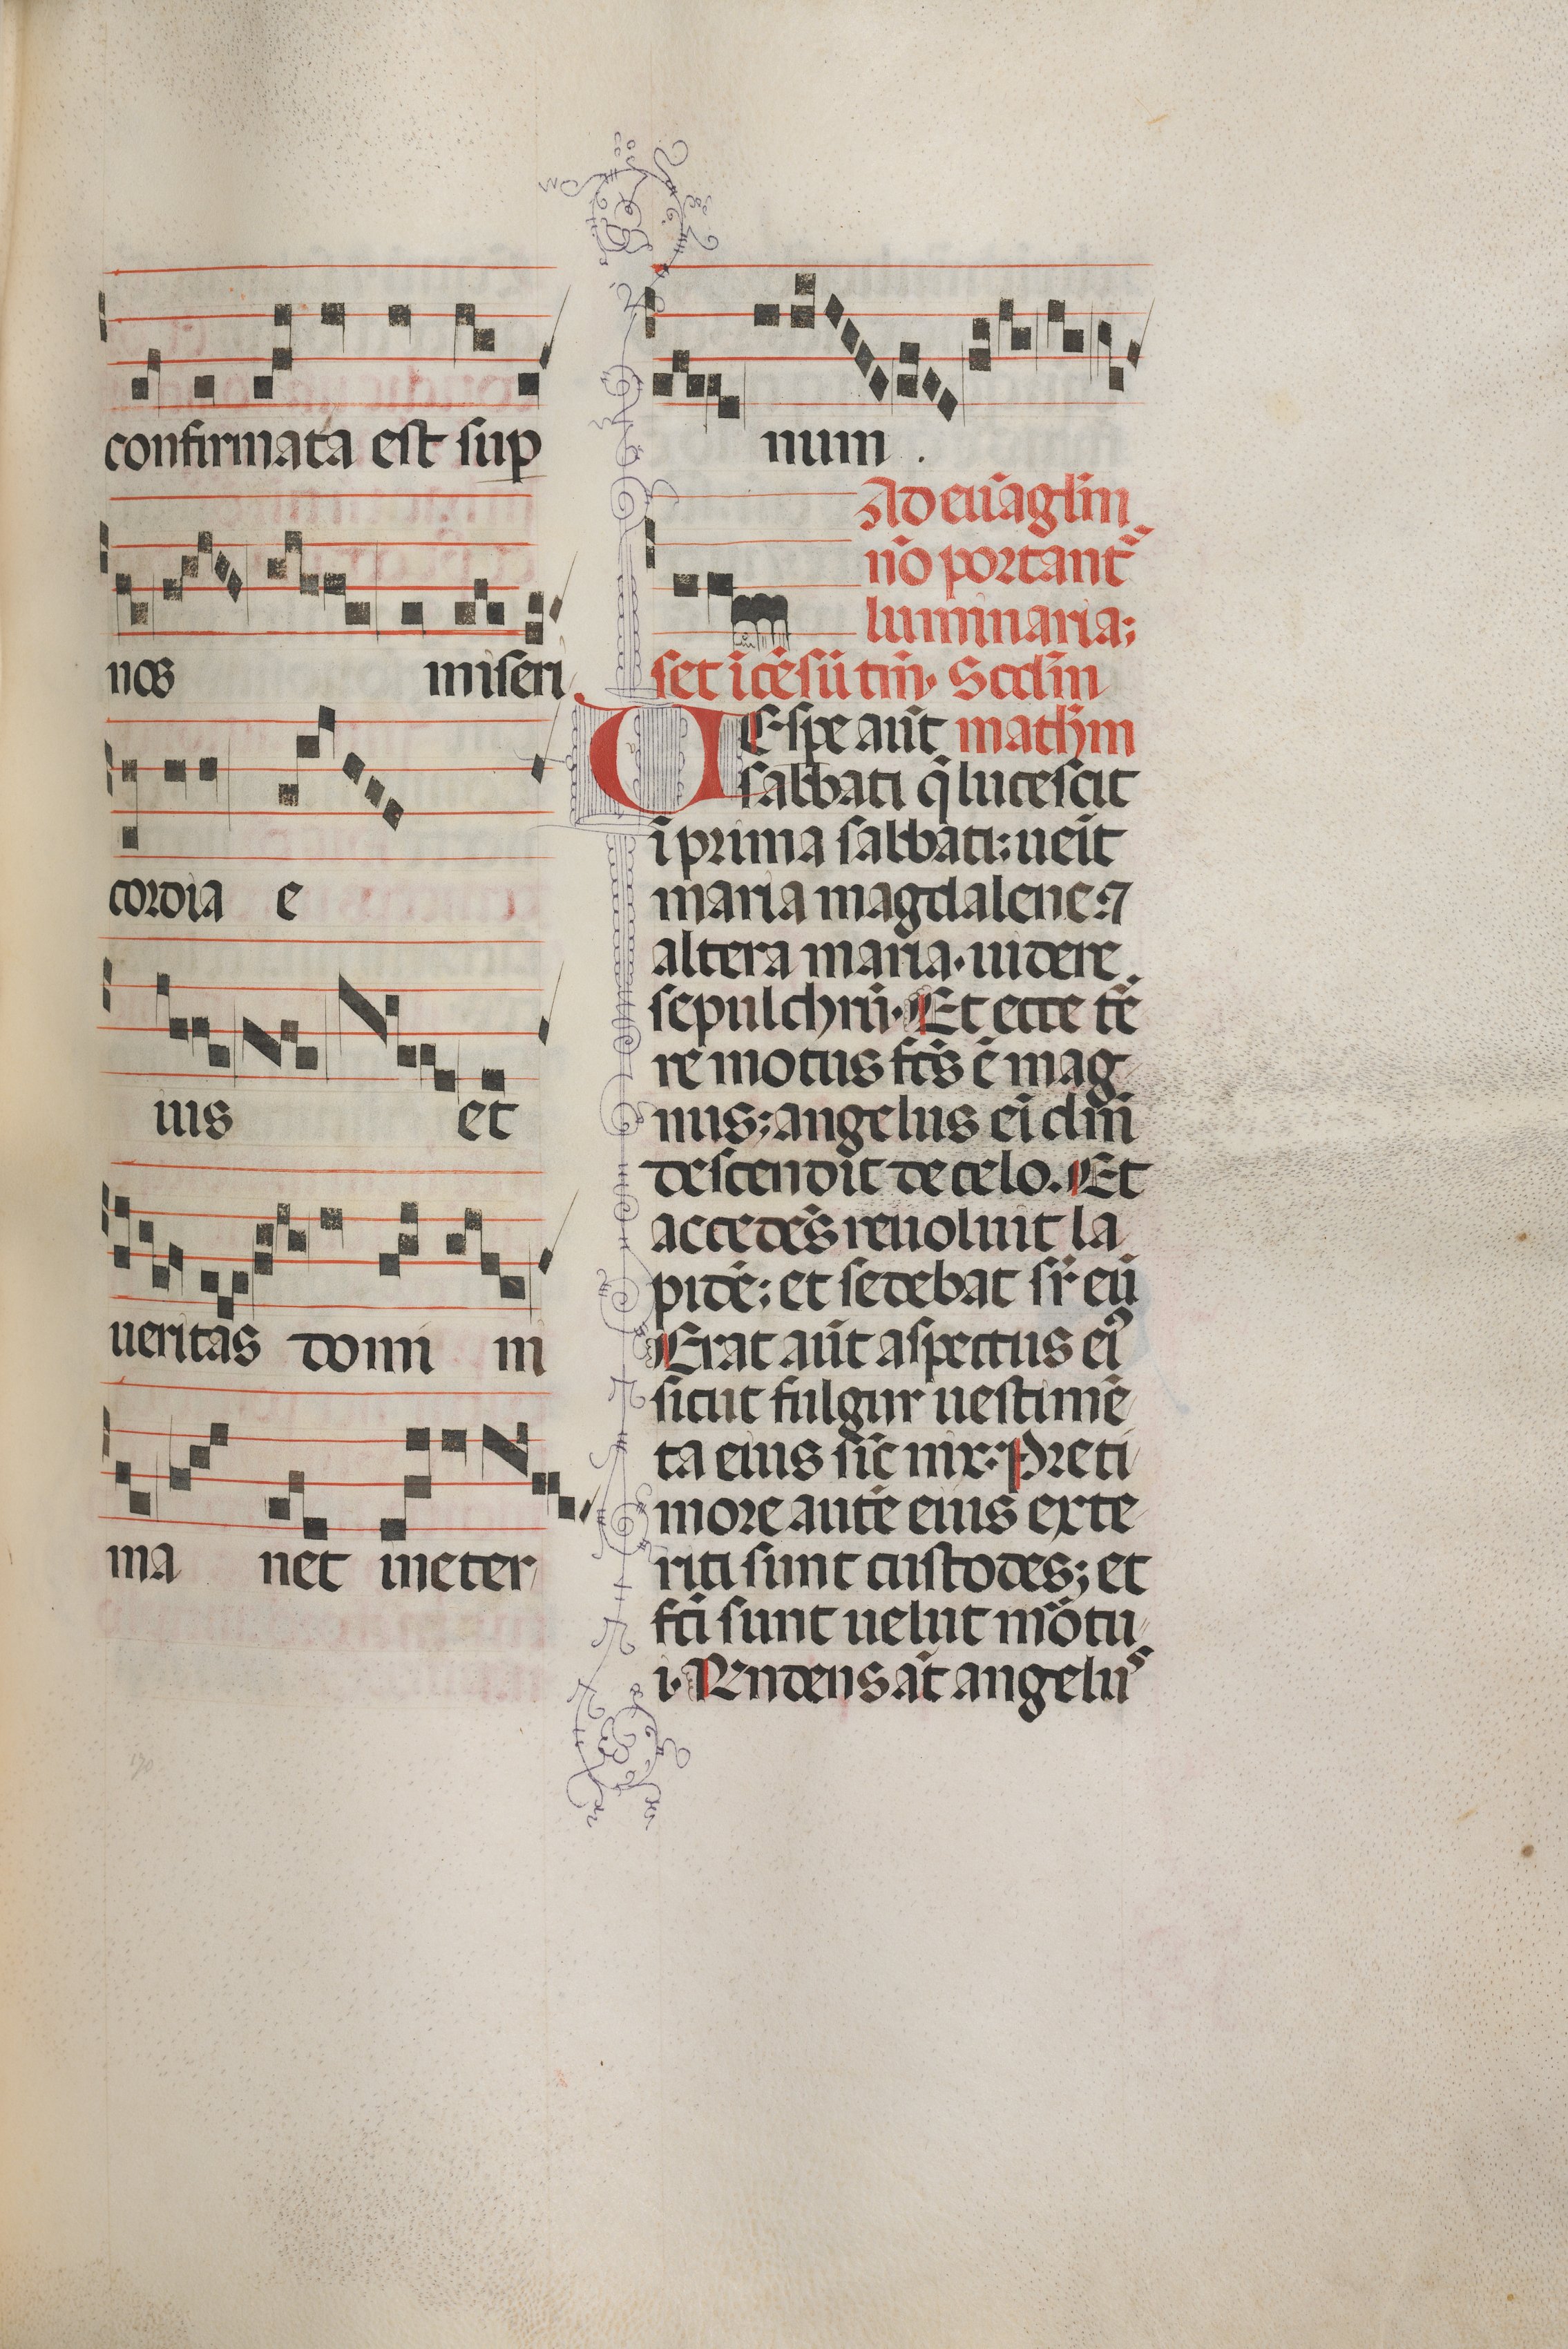 Missale: Fol. 172: Music for "Alleluia" etc. at beginning of Easter